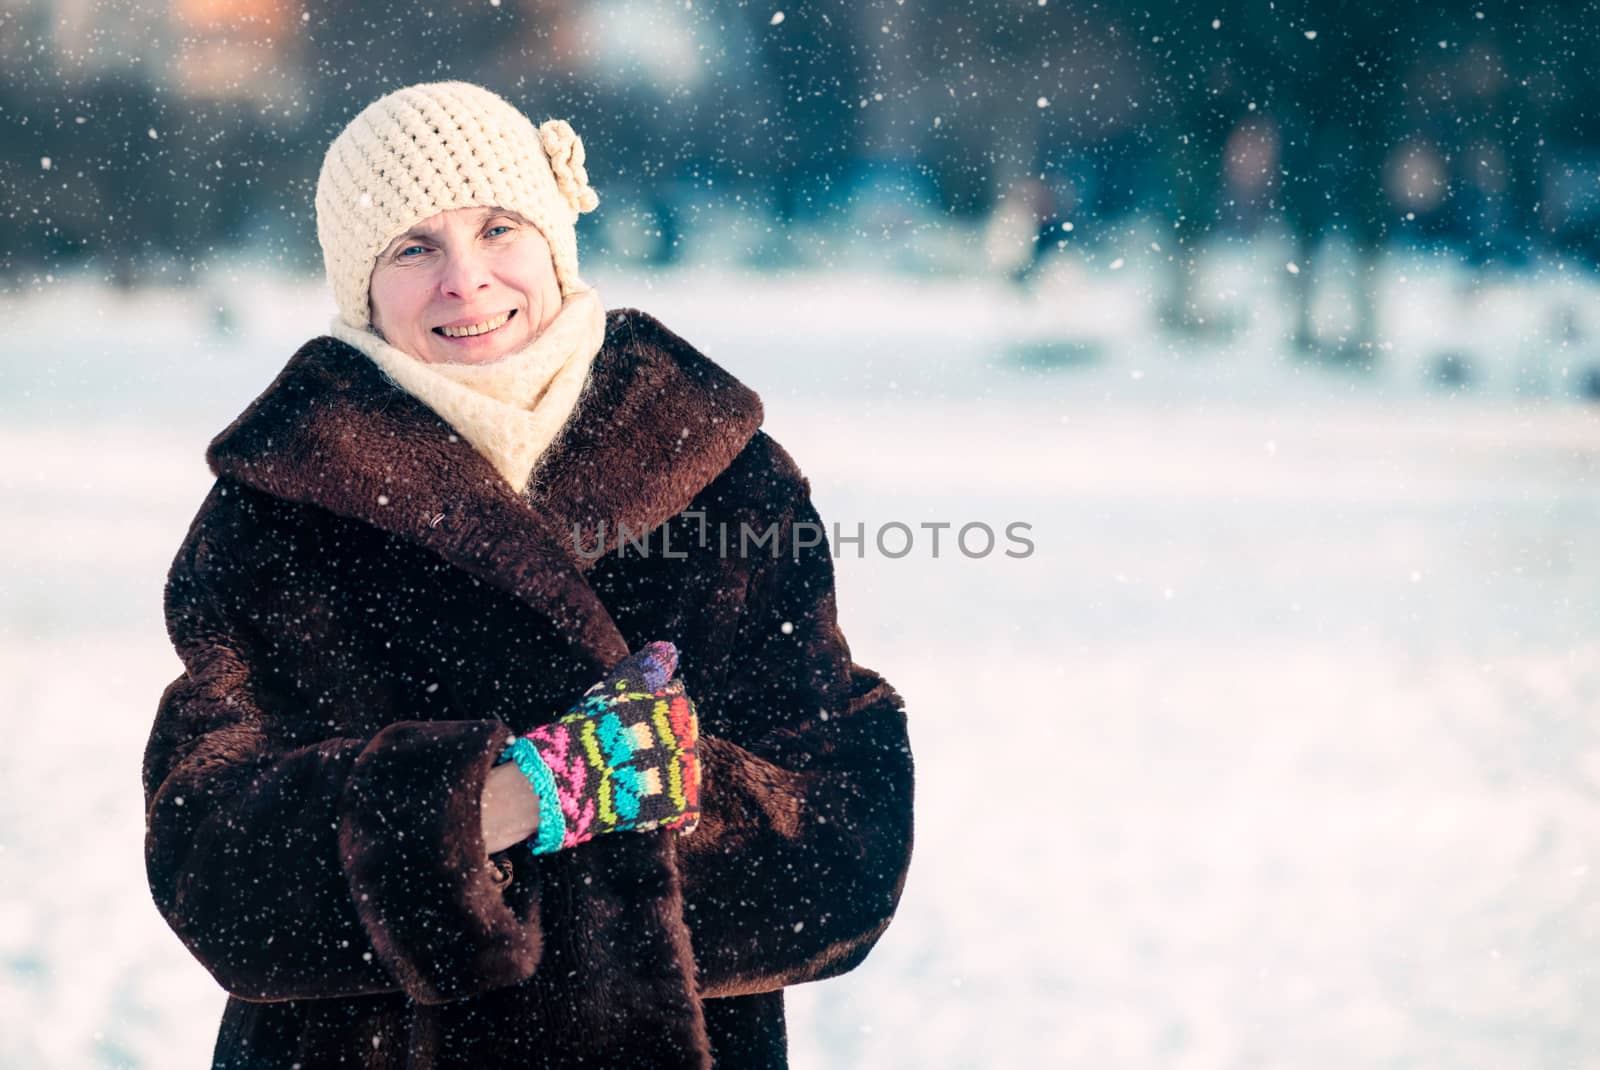 A winter portrait of a smiling senior adult woman wearing a wool cap, a scarf and colored gloves, with a snow background